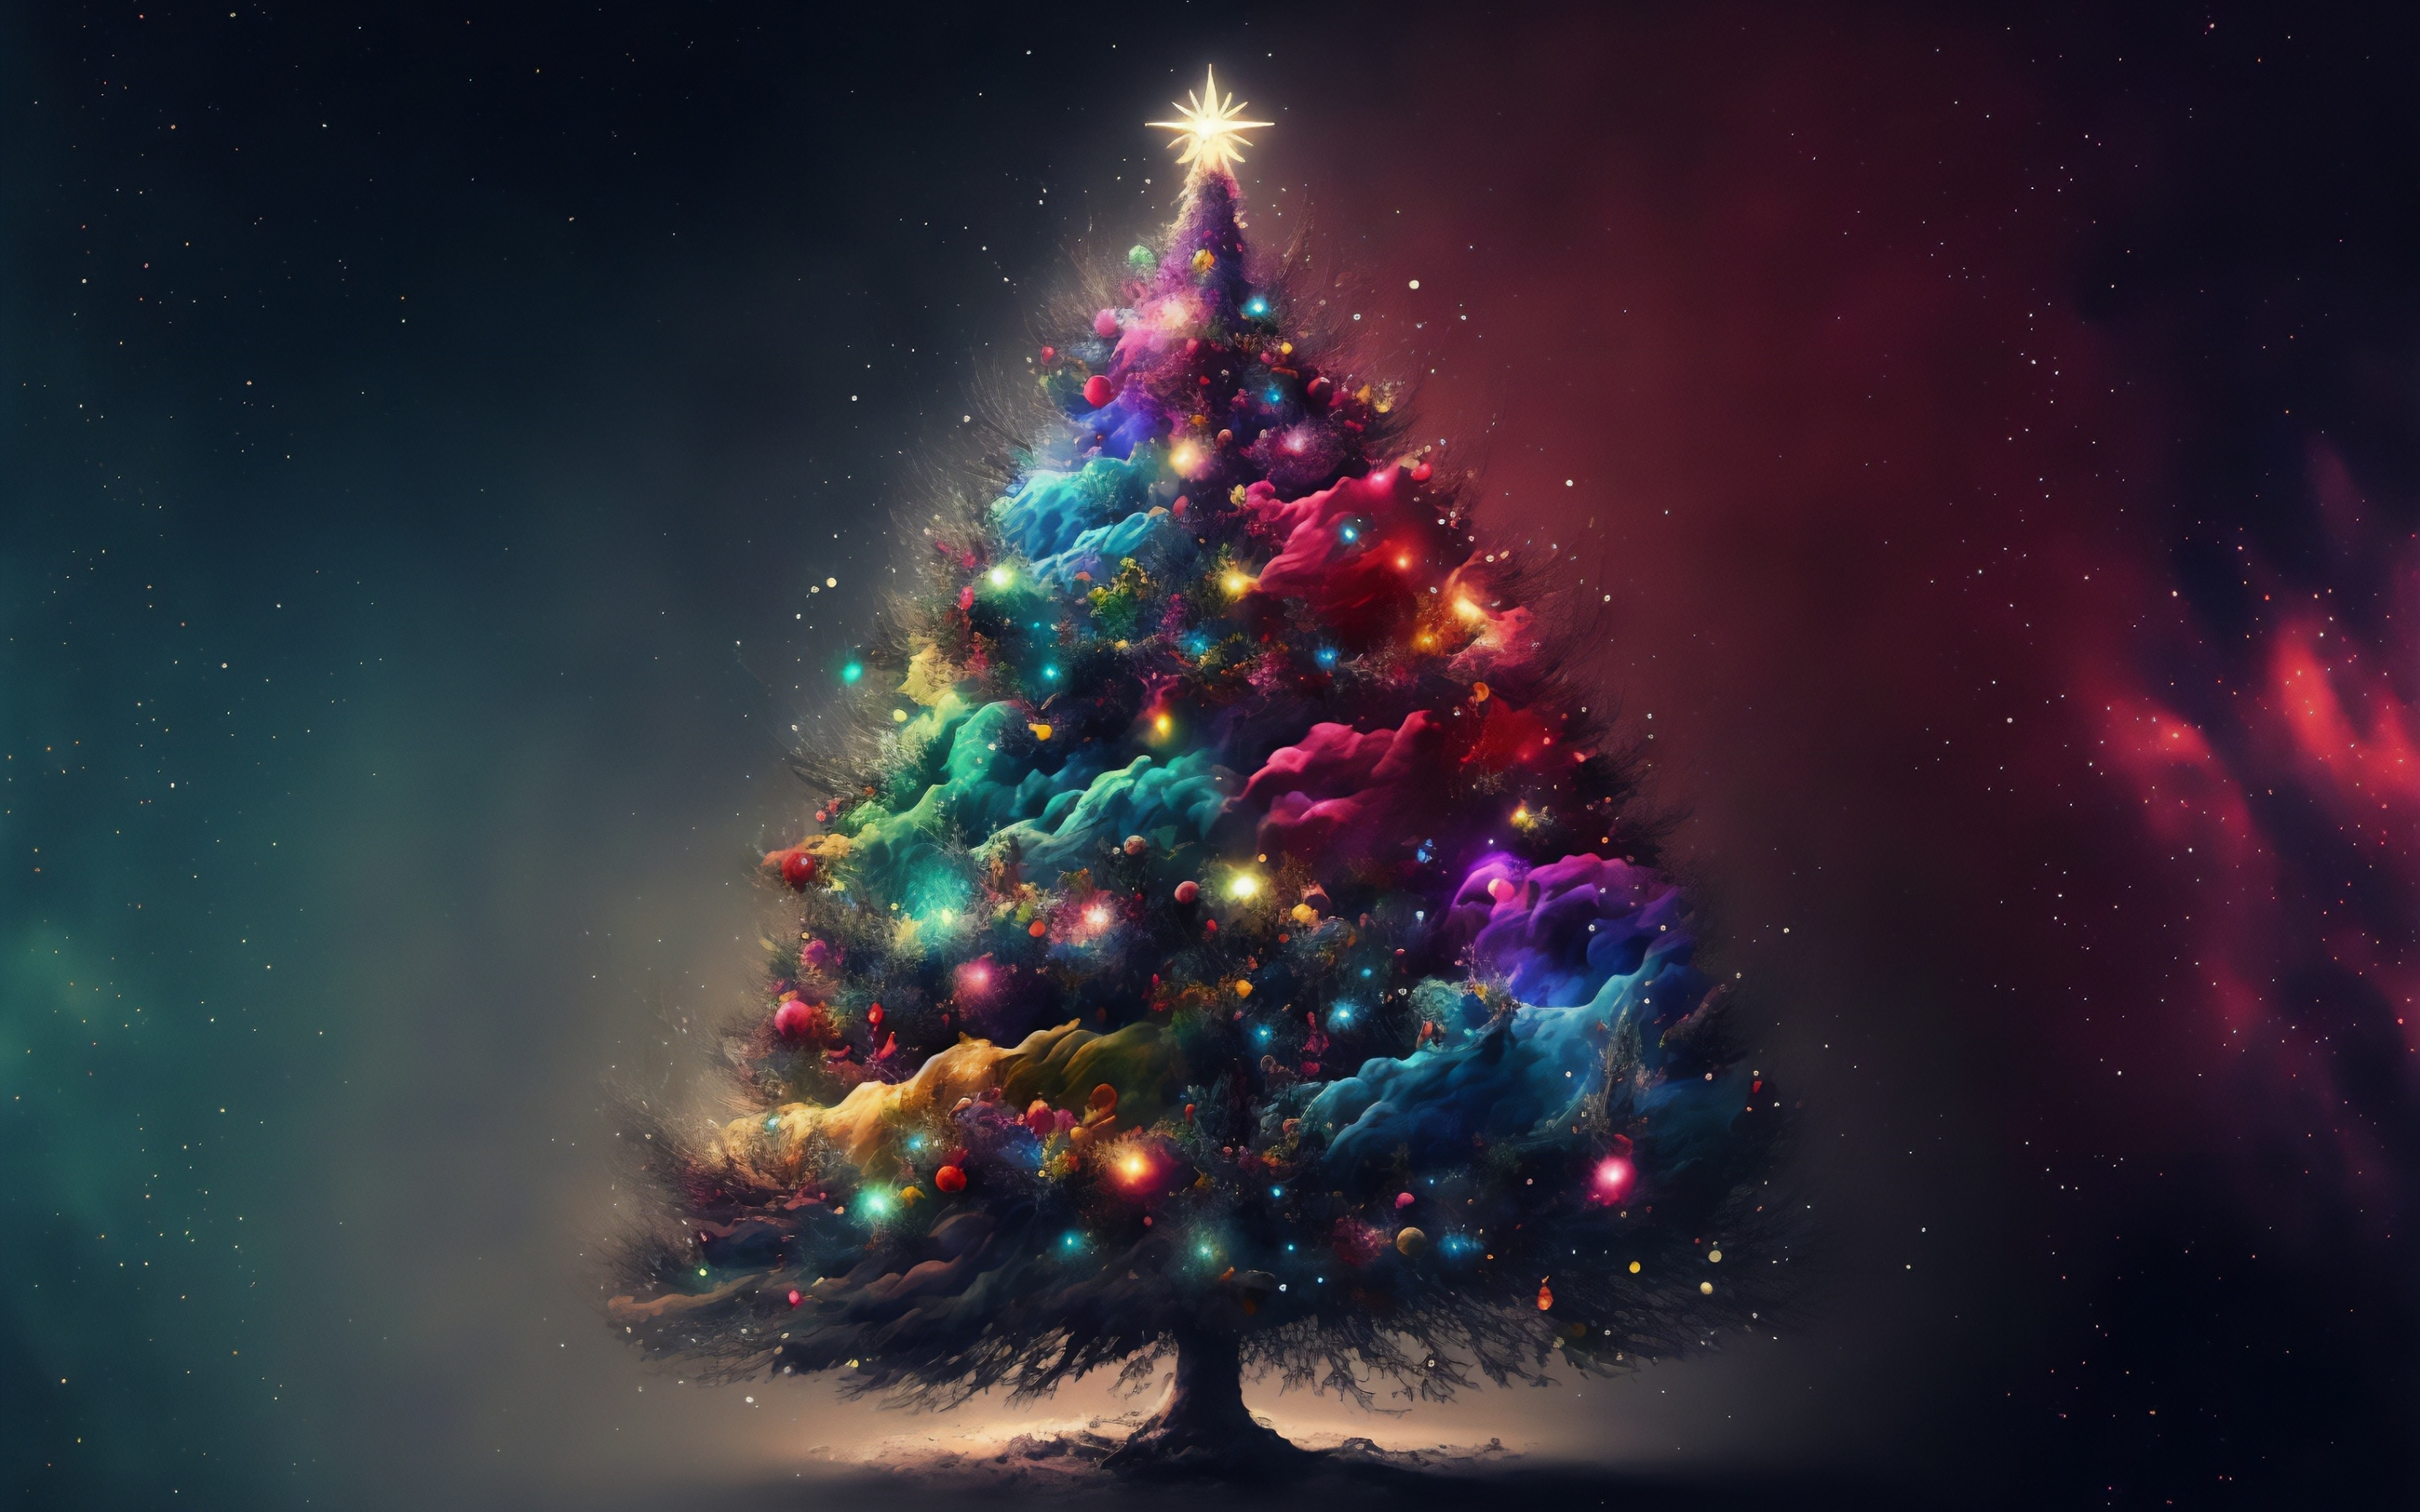 Colorful and decorated Christmas tree, artwork, 2880x1800 wallpaper